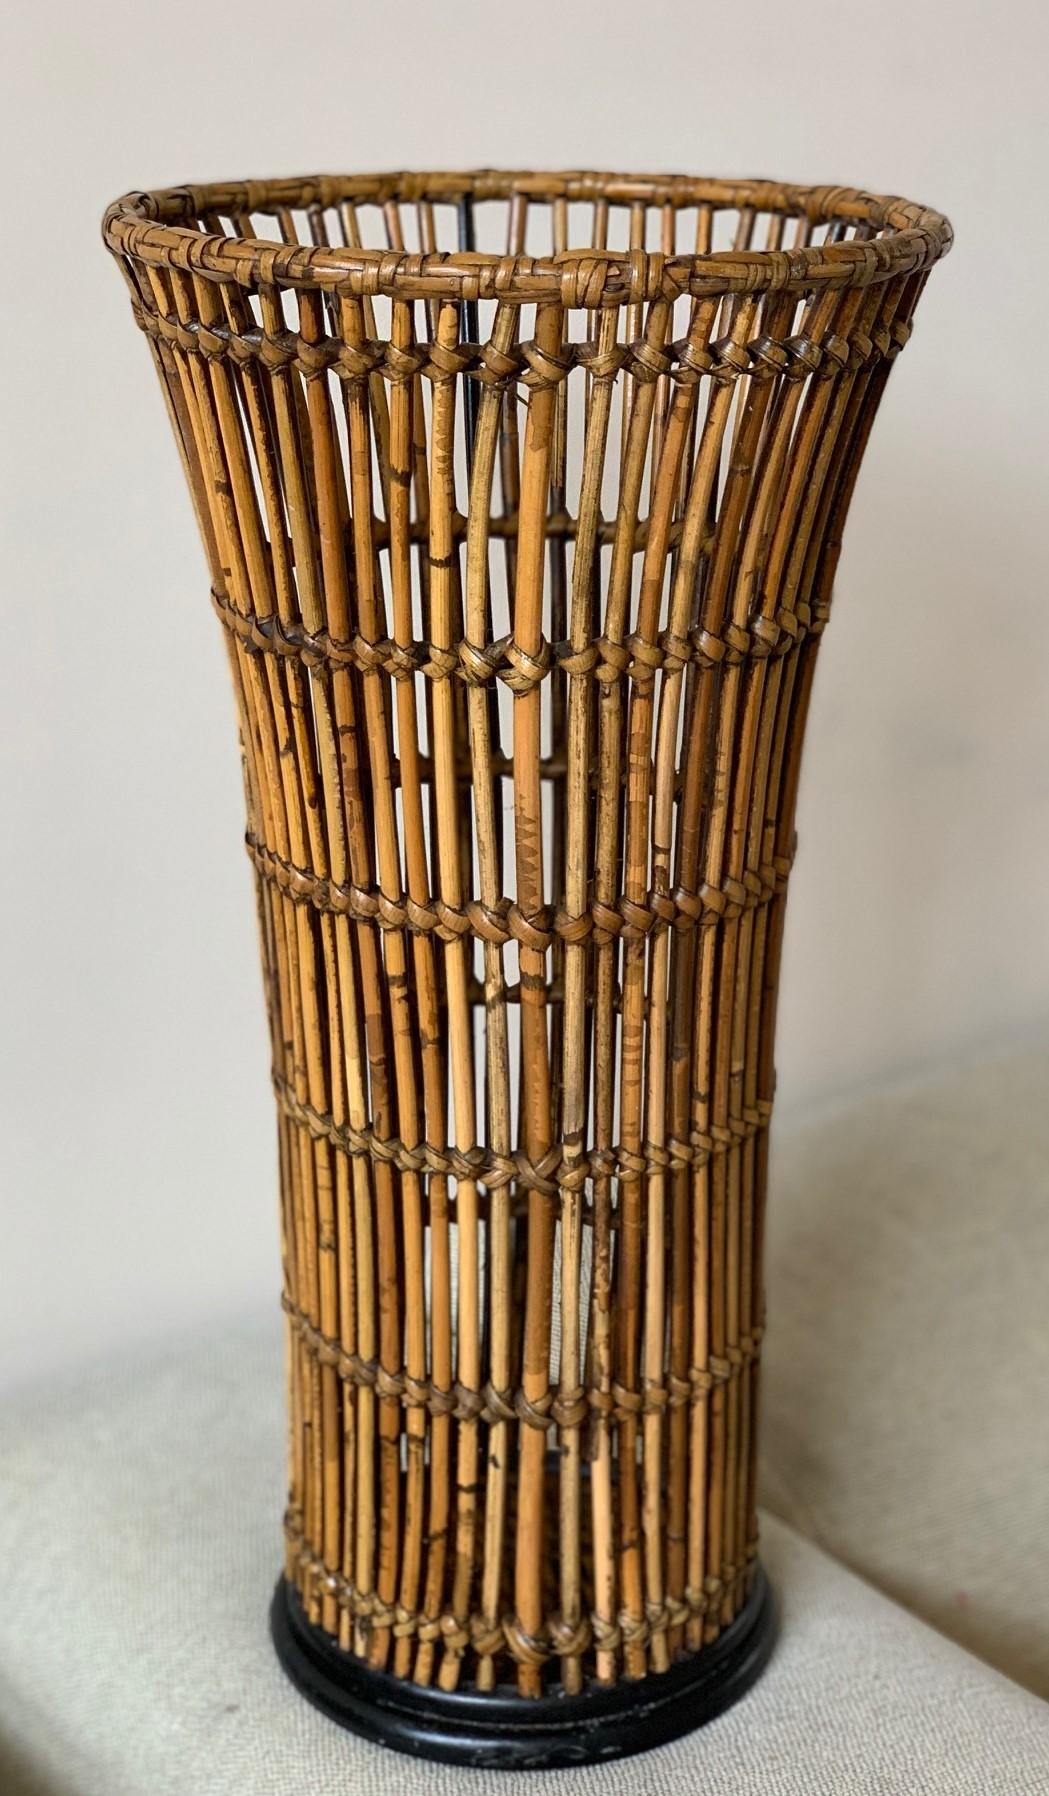 Midcentury rattan bamboo paper bin, cachepots, planter or umbrella stand 1950s
Beautiful midcentury 1950s Italian umbrella stand. It is made of bamboo with lovely small ball screw nuts. The rare umbrella stand which has a conical shape is 41 cm /